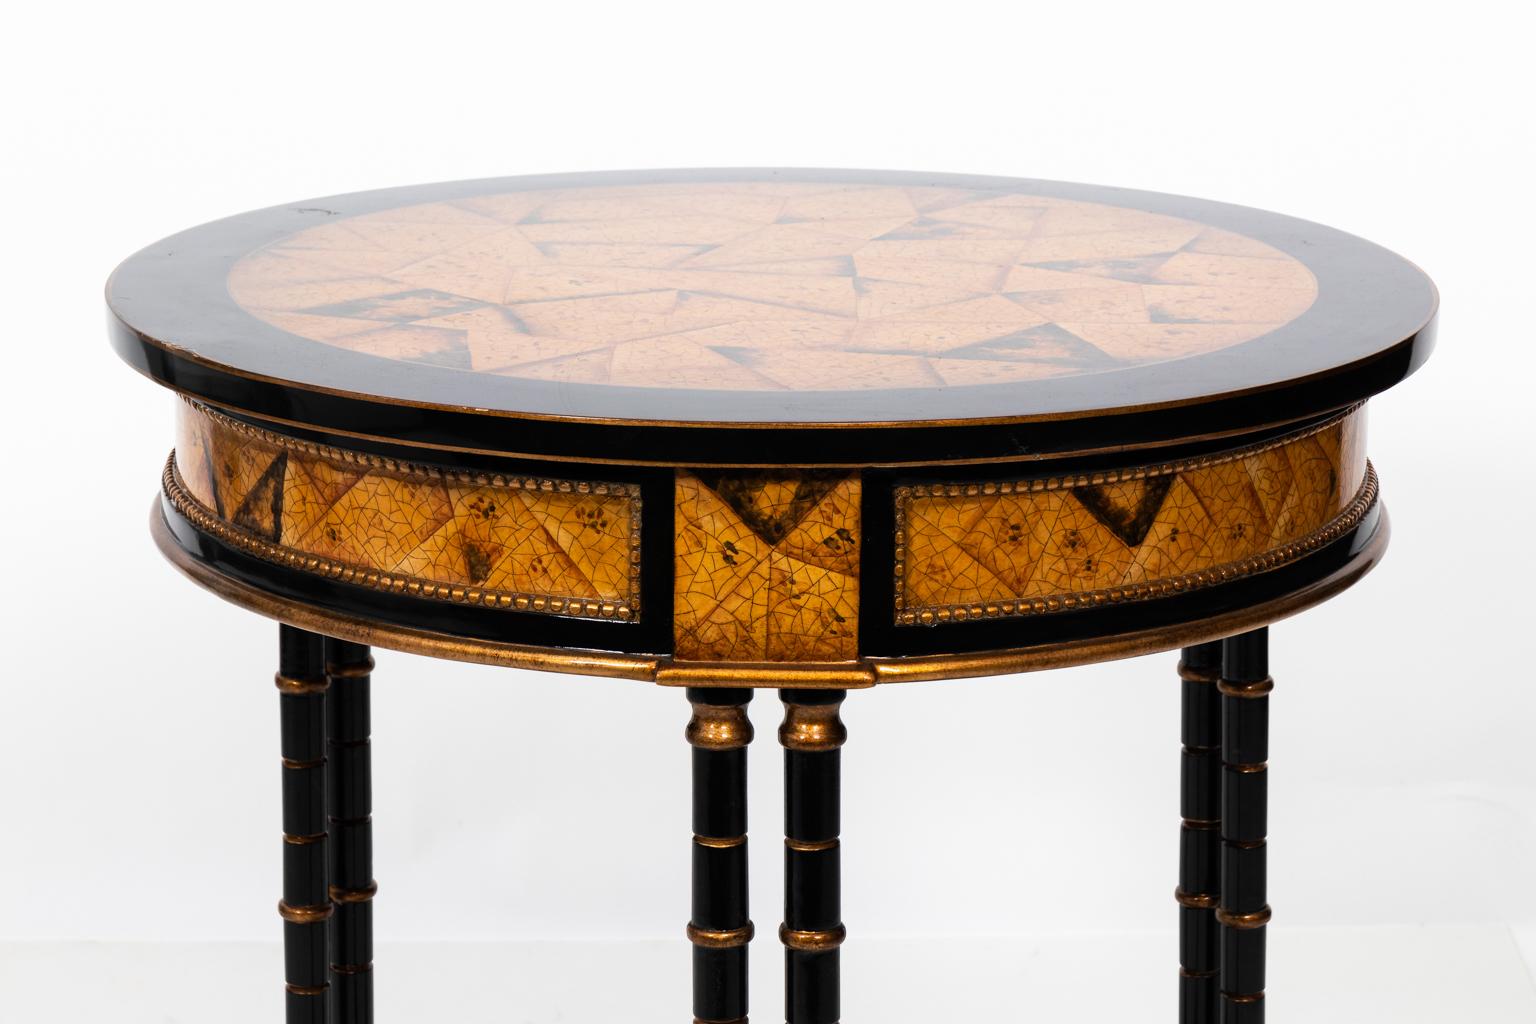 Faux bamboo painted side tables with decorated tops, beaded trim, and bottom shelves, circa 20th century. Please note of wear consistent with age including wear to the tabletop.
 